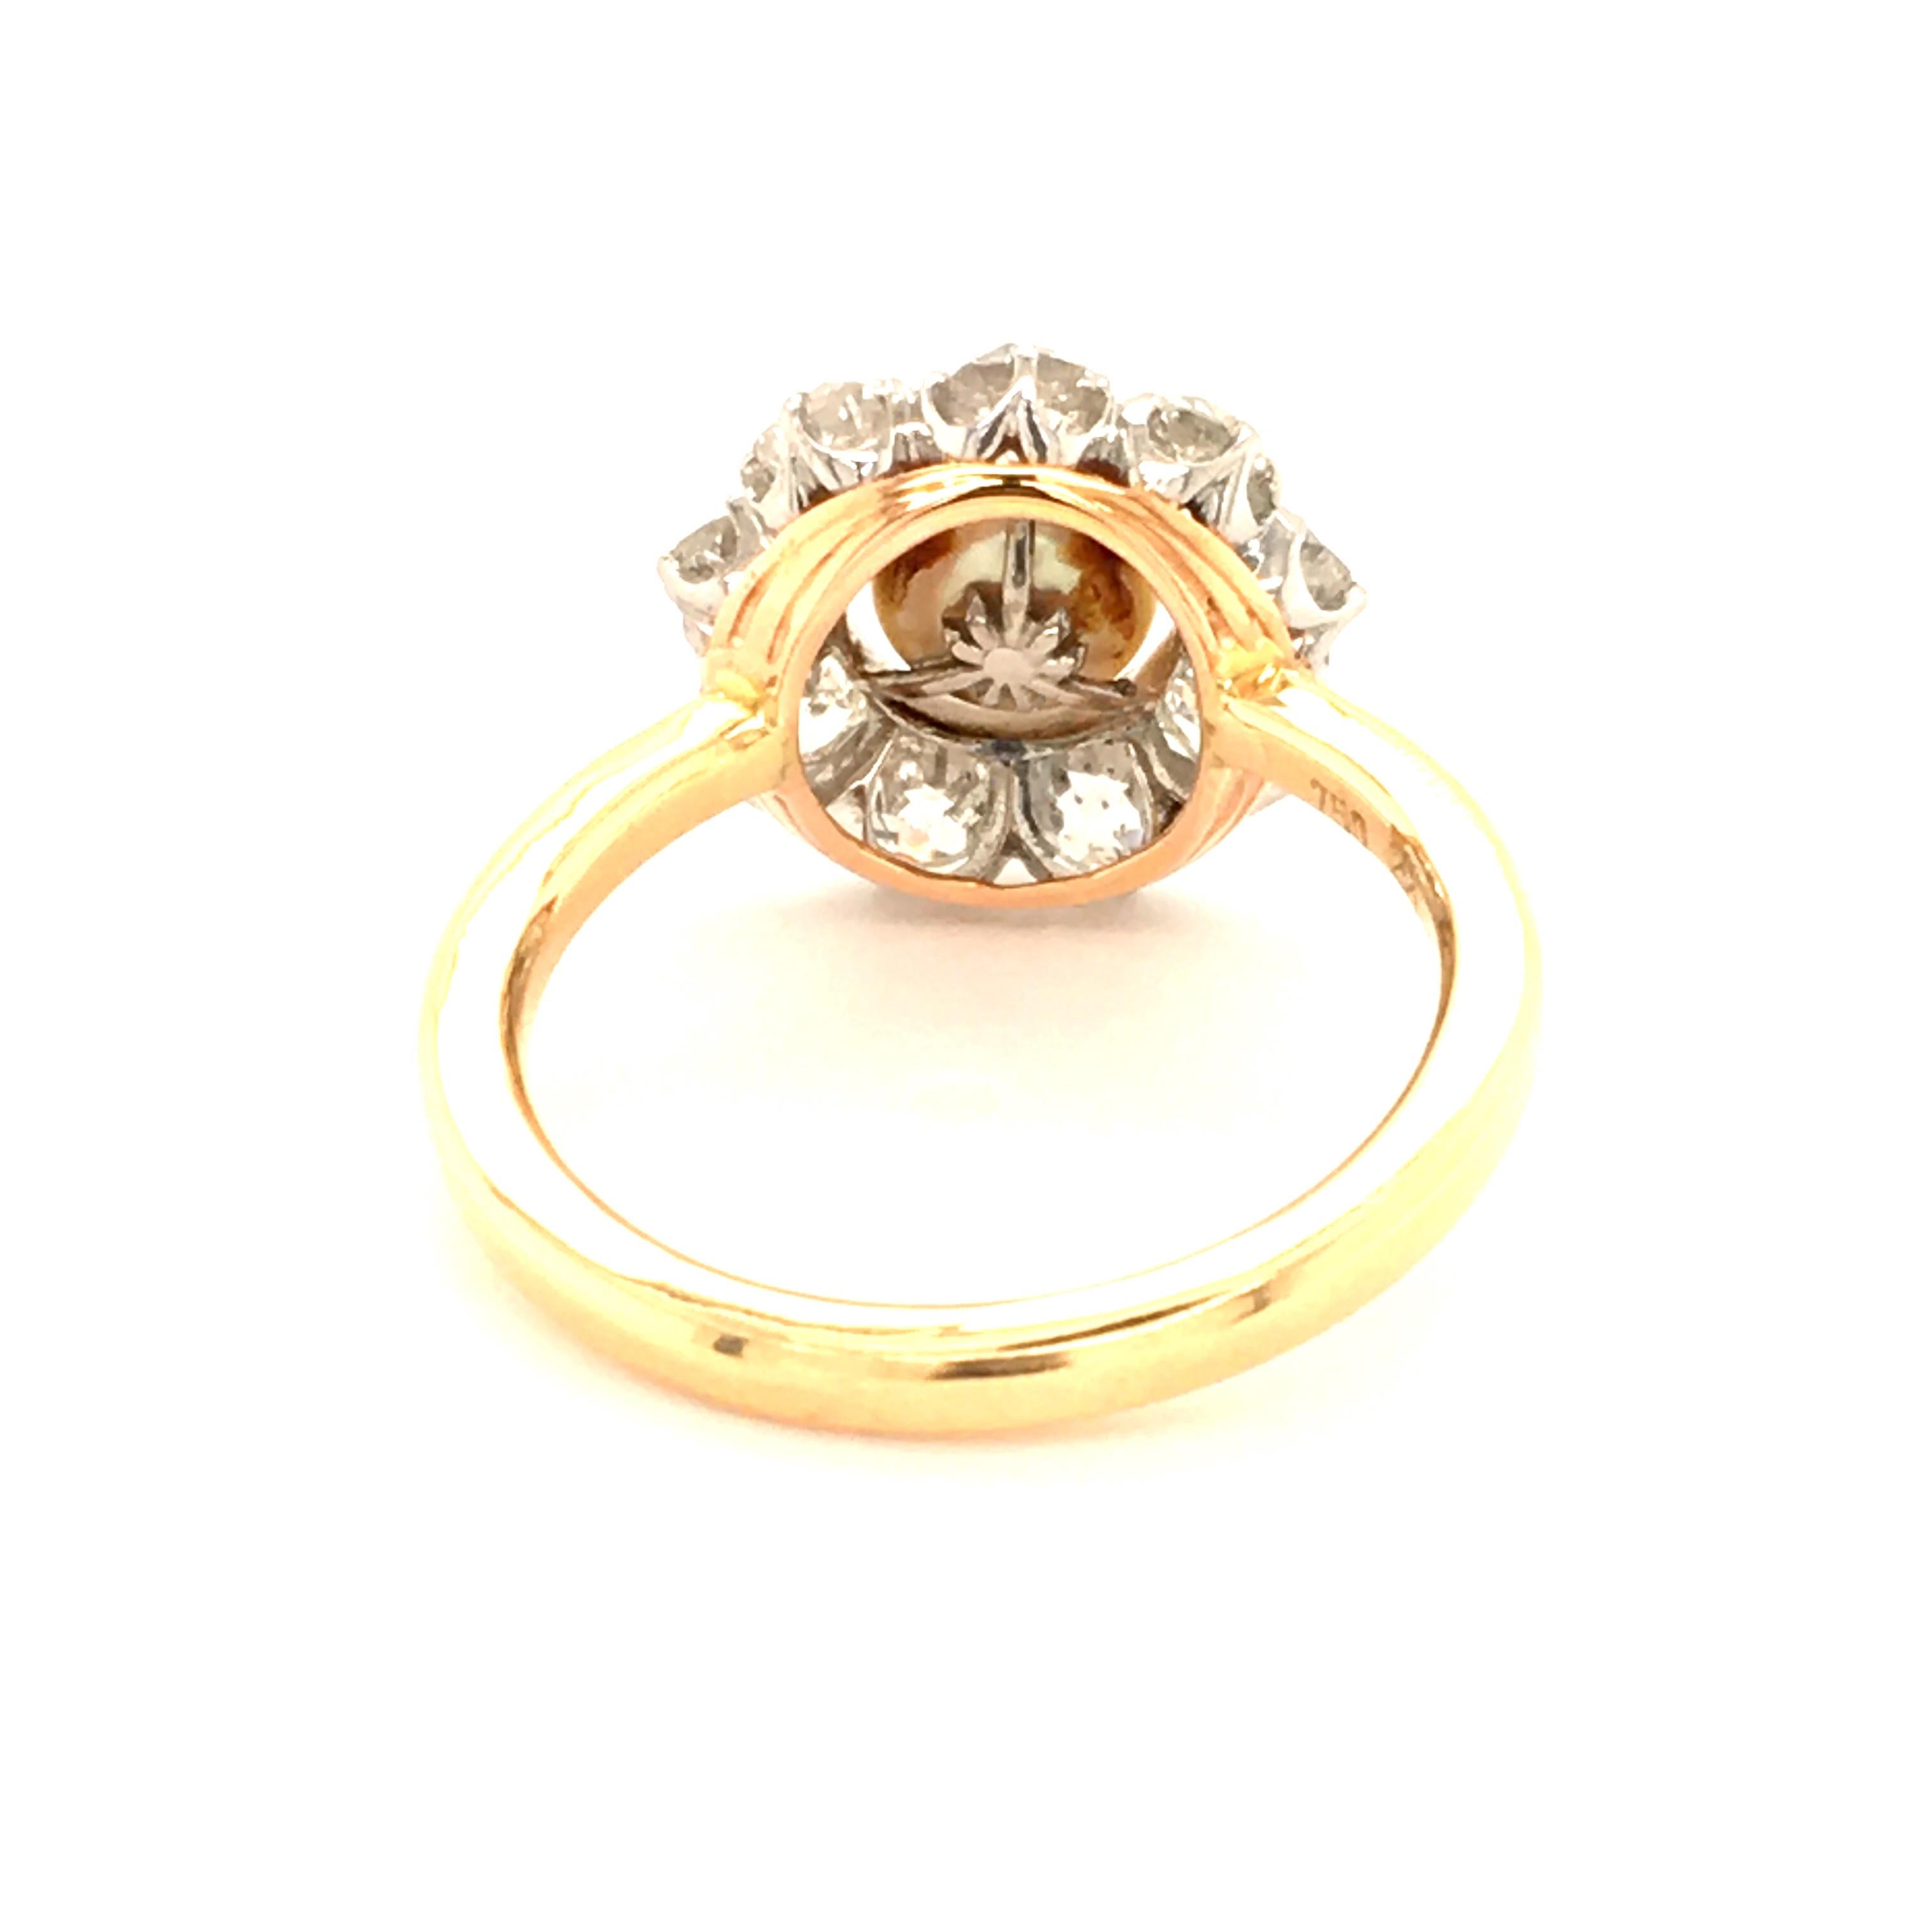 Artisan Gold Ring Set with a Natural Pearl Surrounded by Oldcut-Diamonds